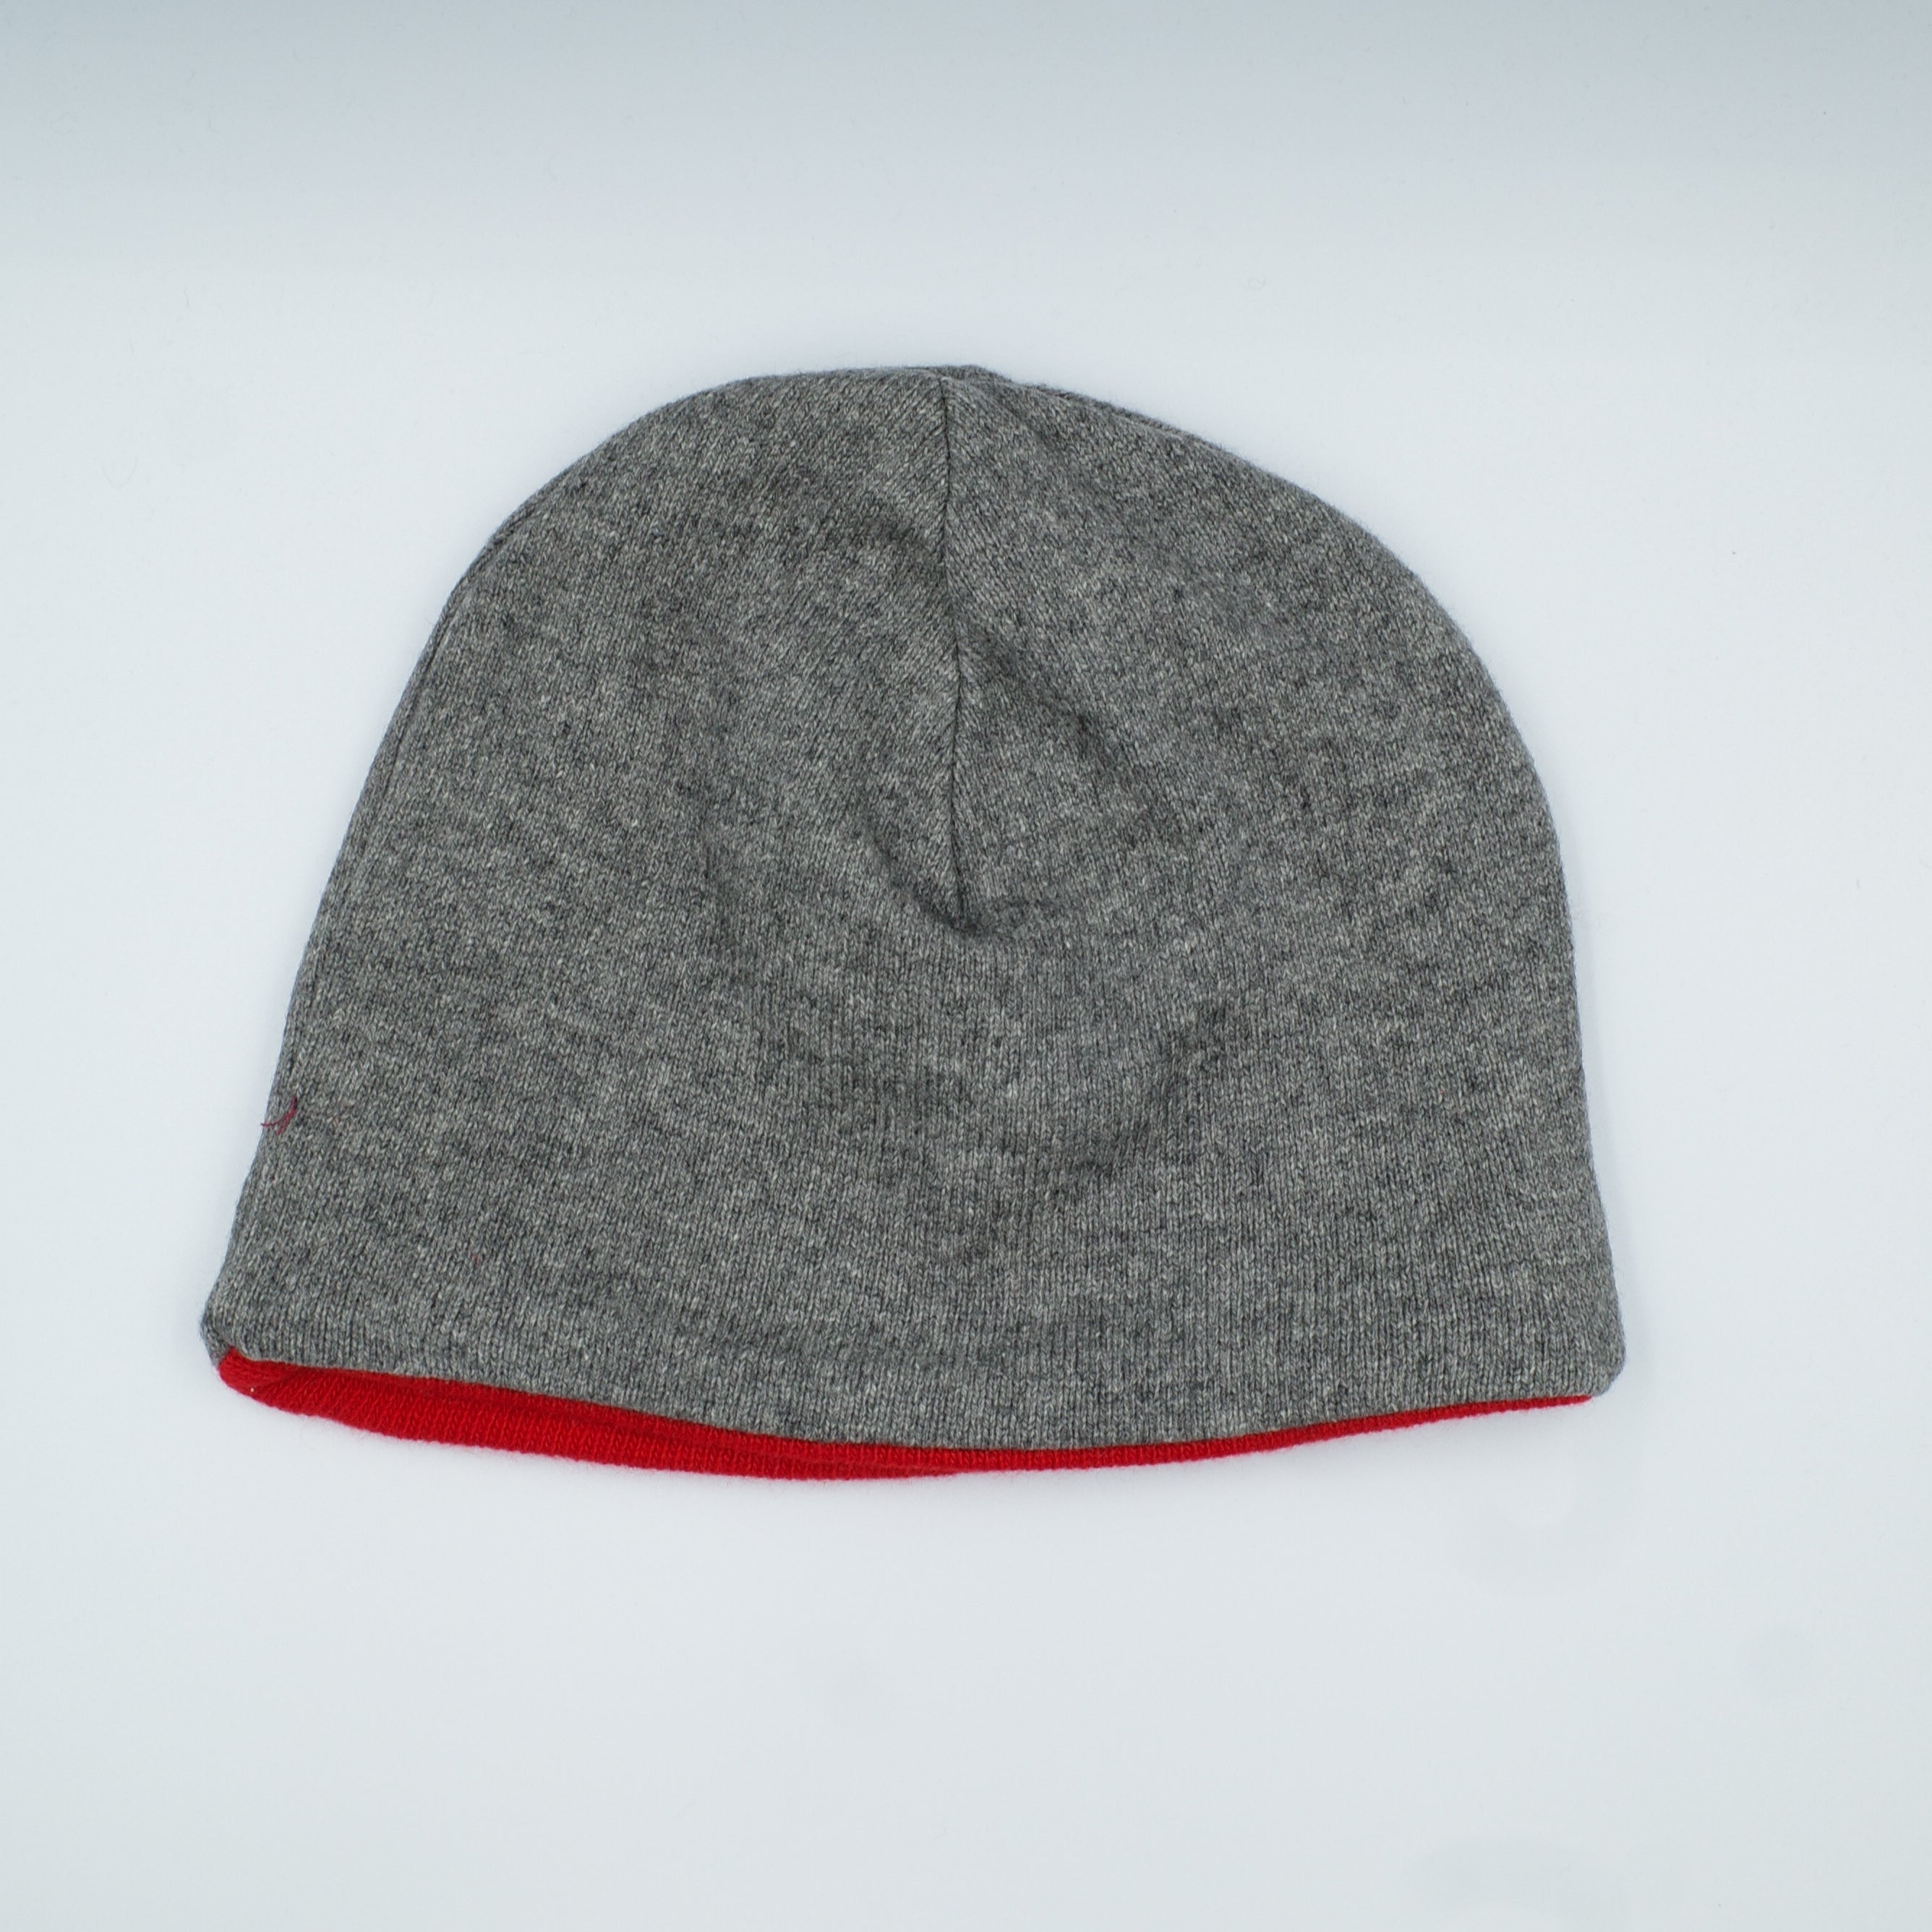 Slate Grey and Scarlet Red Cashmere Beanie Hat